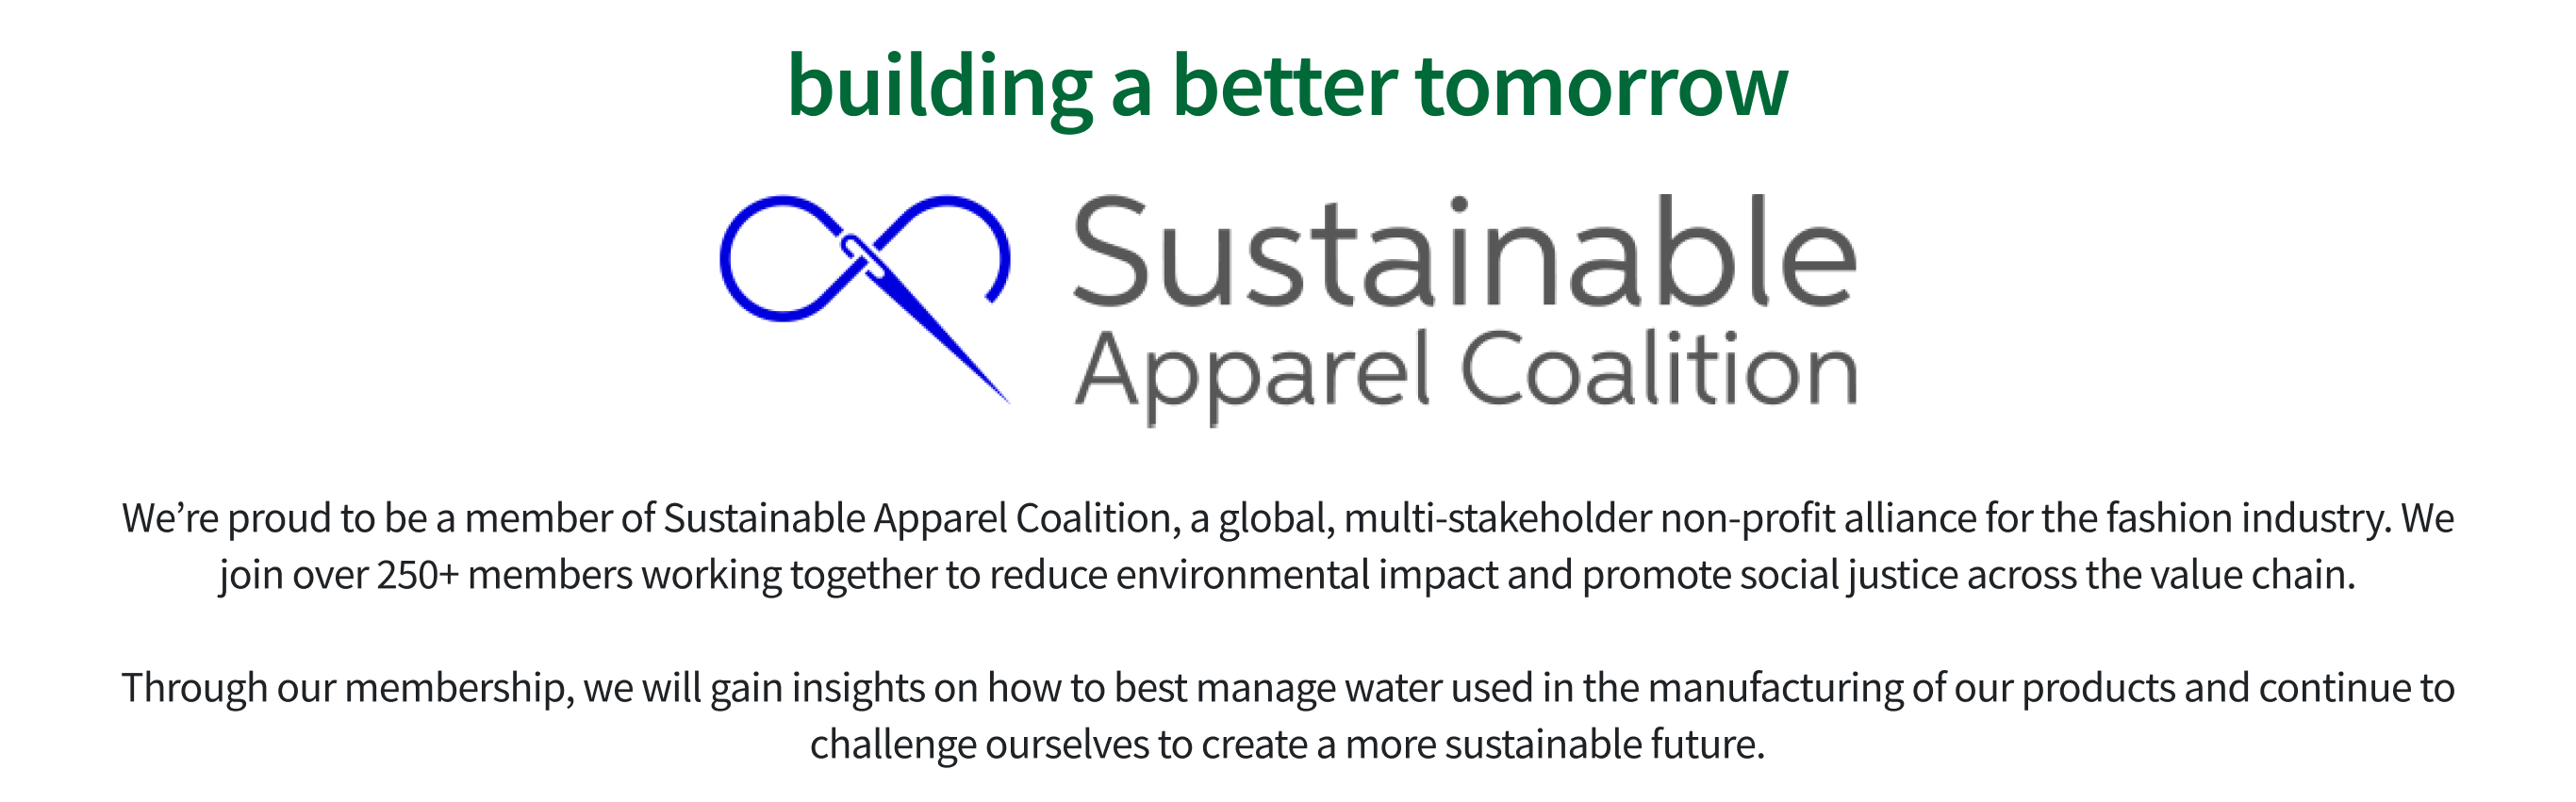 sustainable apparel collection | We’re proud to be a member of Sustainable Apparel Coalition, a global, multi-stakeholder non-profit alliance for the fashion industry. We join over 250+ members working together to reduce environmental impact and promote social justice across the value chain.Through our membership, we will gain insights on how to best manage water used in the manufacturing of our products and continue to challenge ourselves to create a more sustainable future.